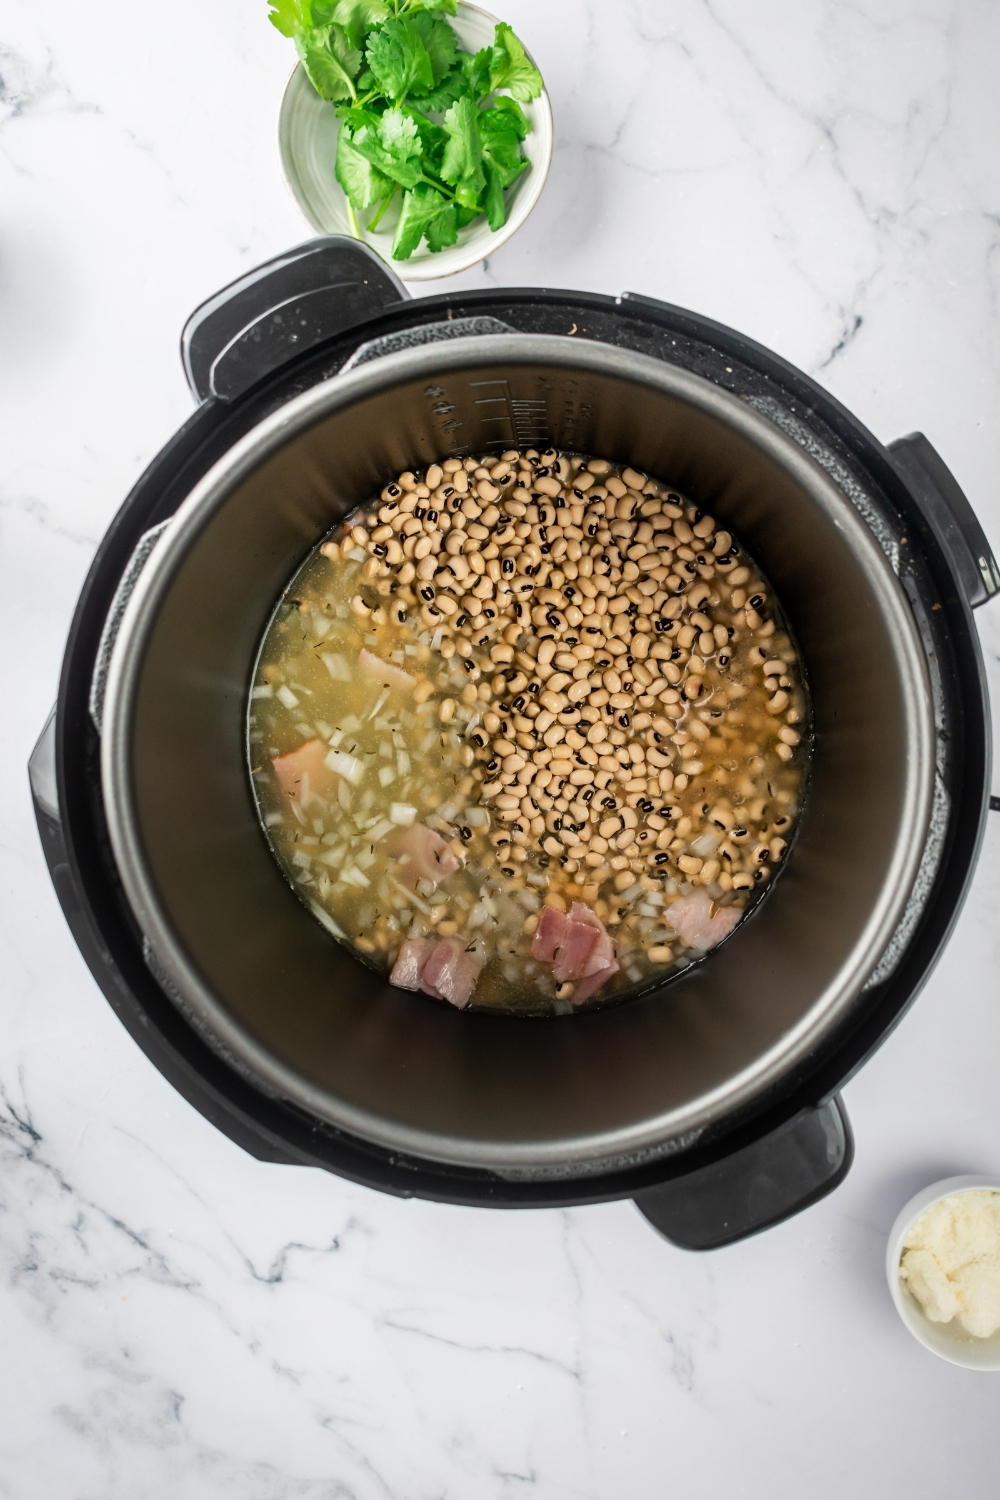 And instant pot on a white counter filled with black-eyed pea's, bacon, onions, and chicken stock.